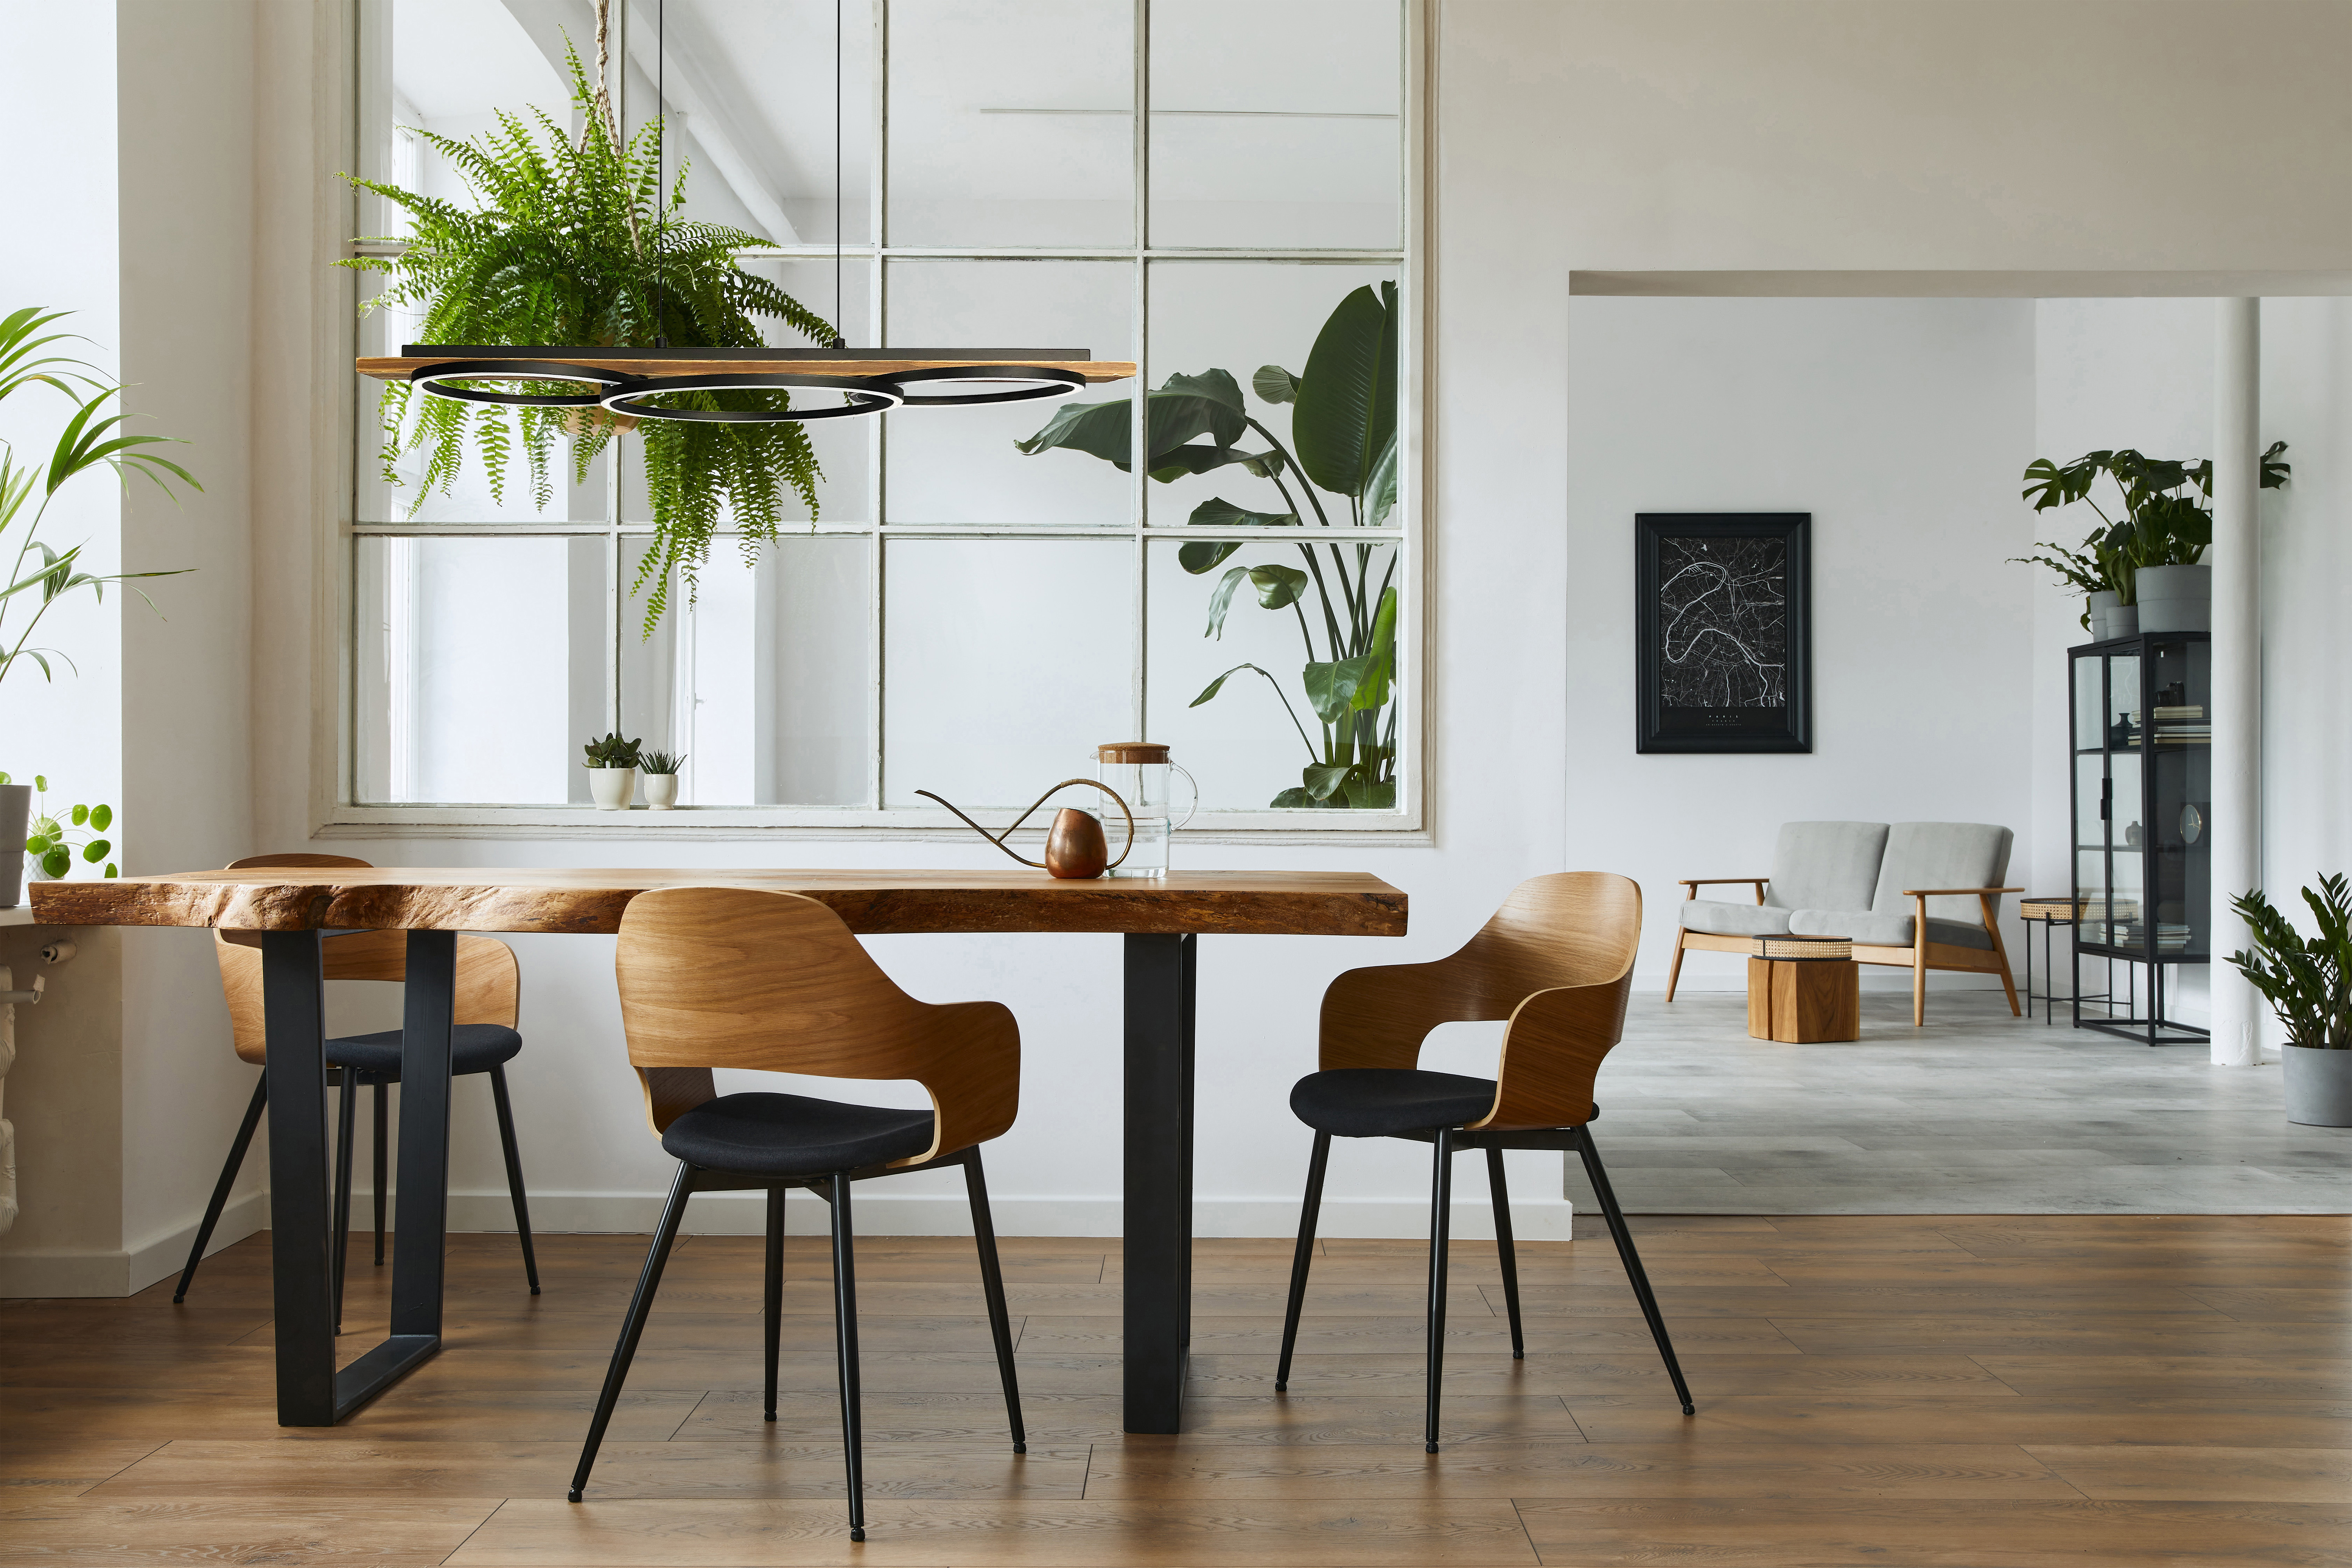 Modern pendant BOYAL Eglo 204922A above wooden dining table with wooden chairs